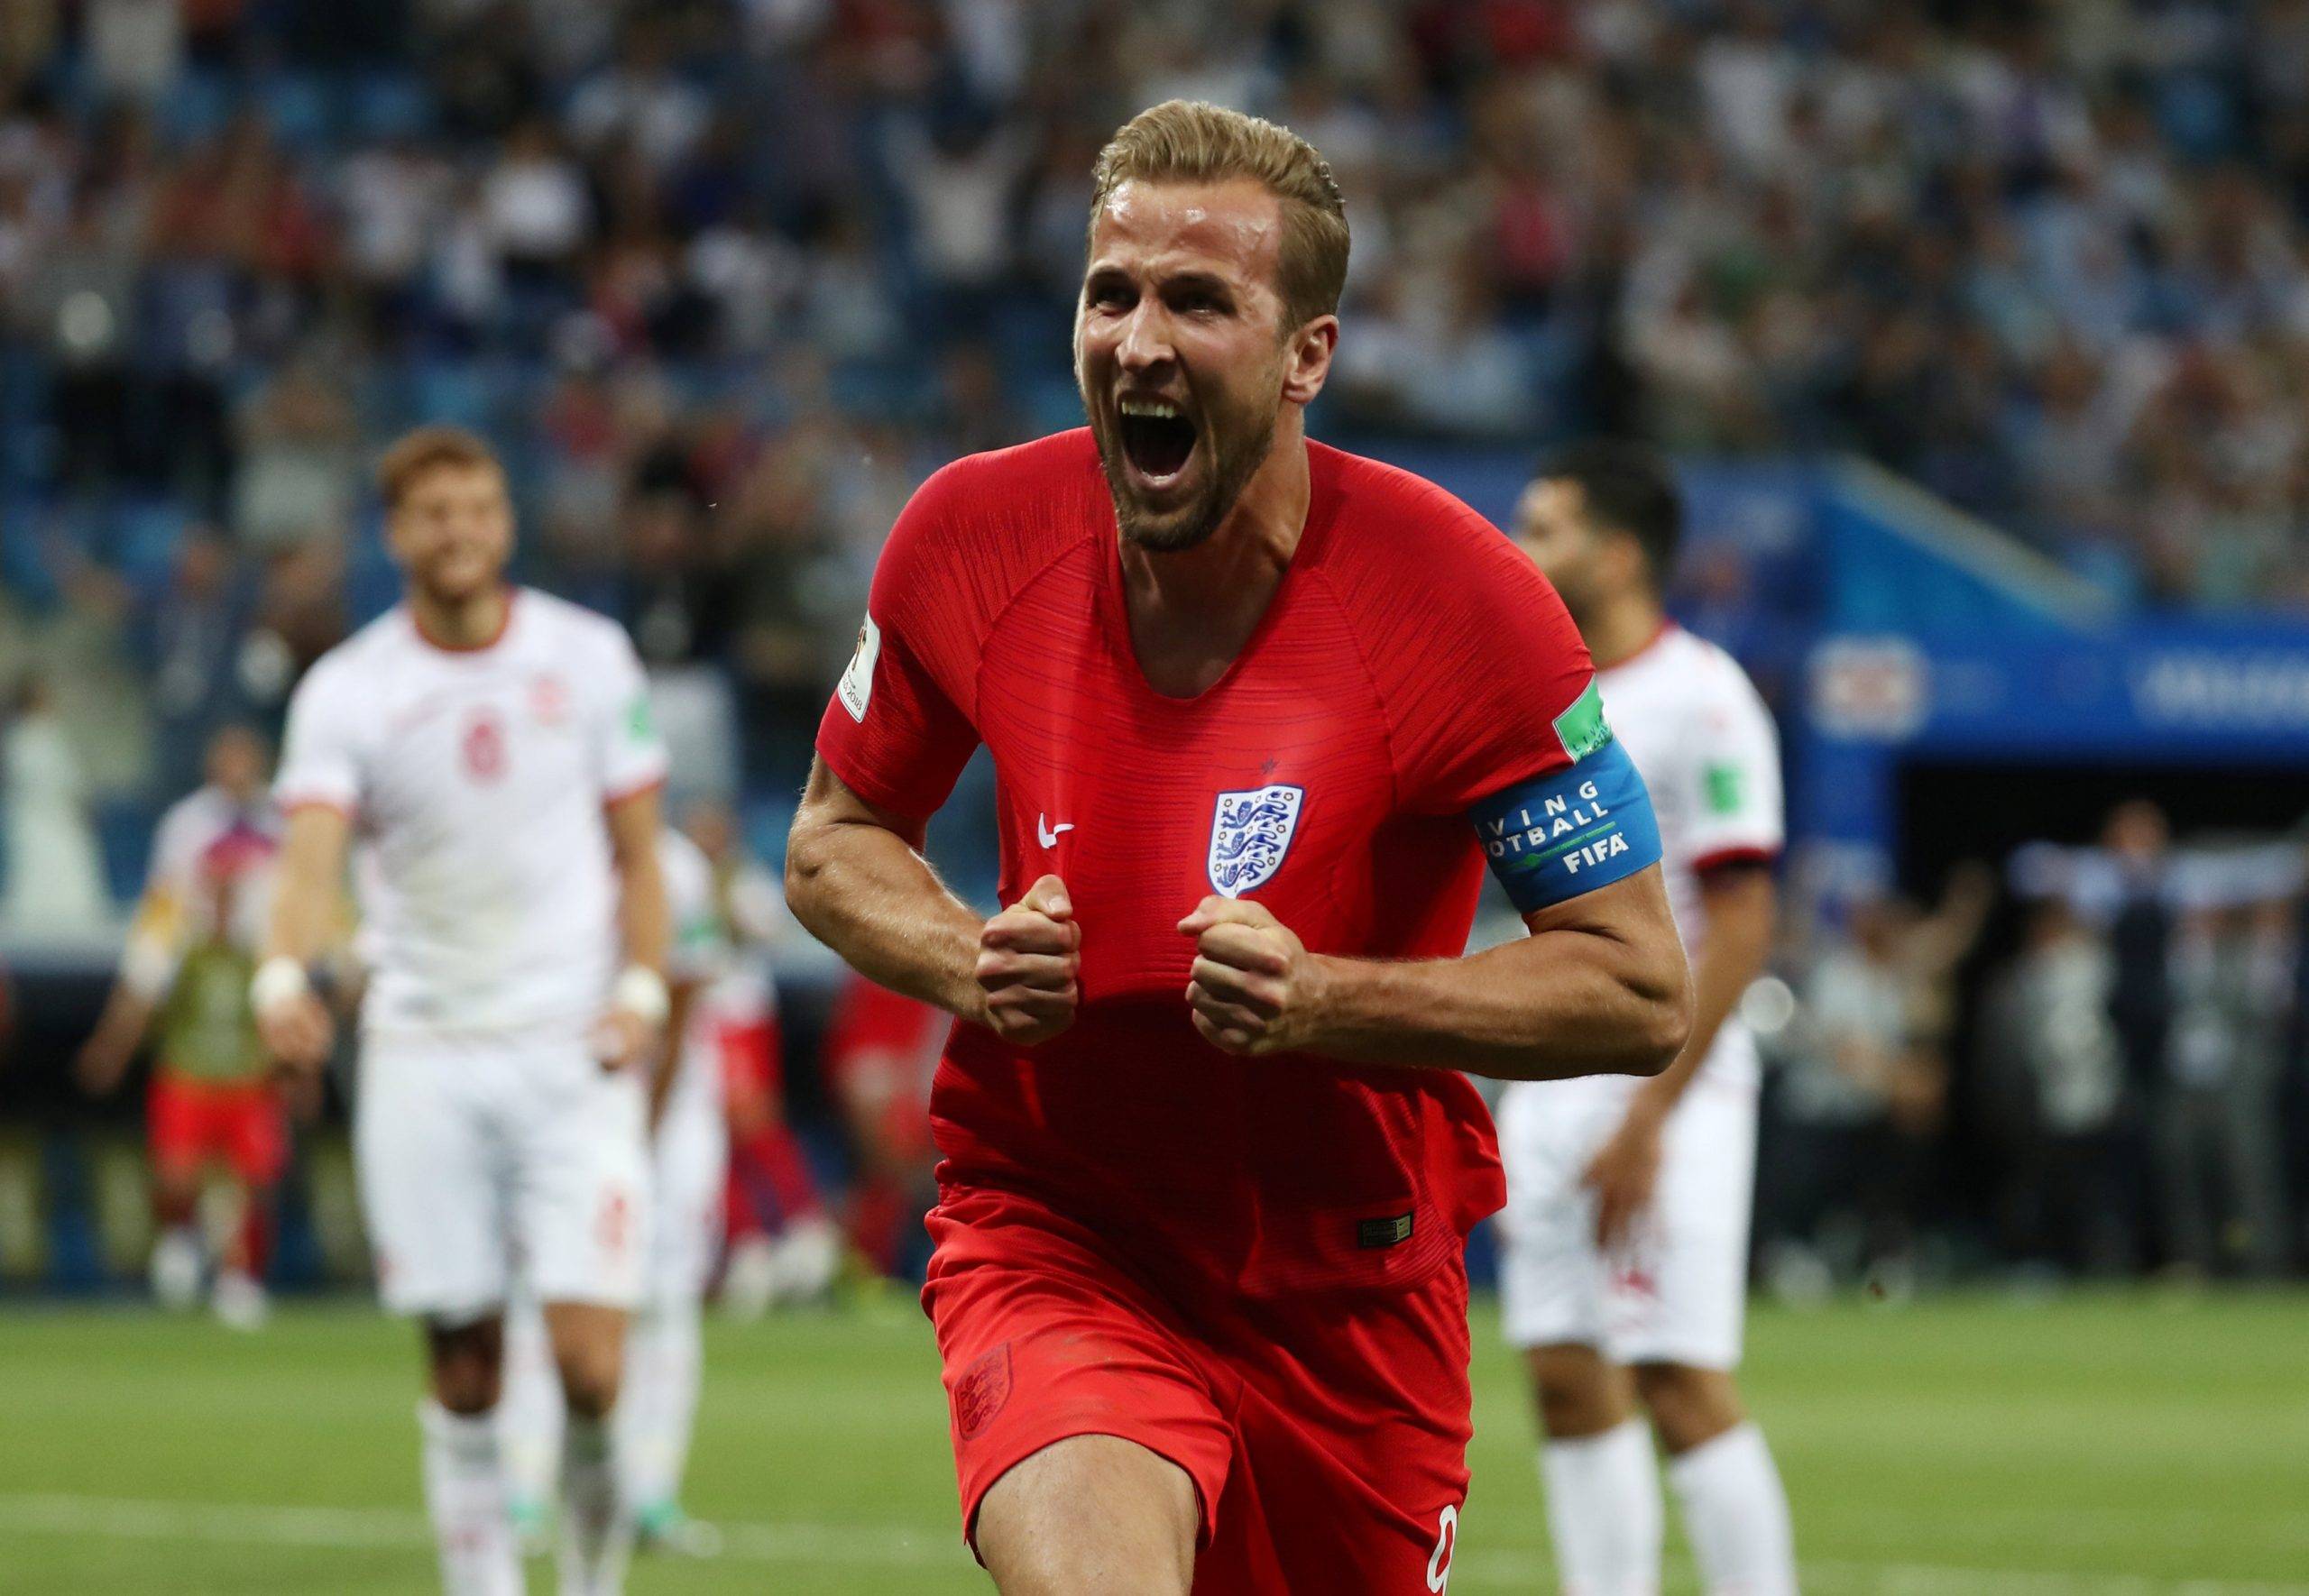 Kane scores at the 2018 World Cup.